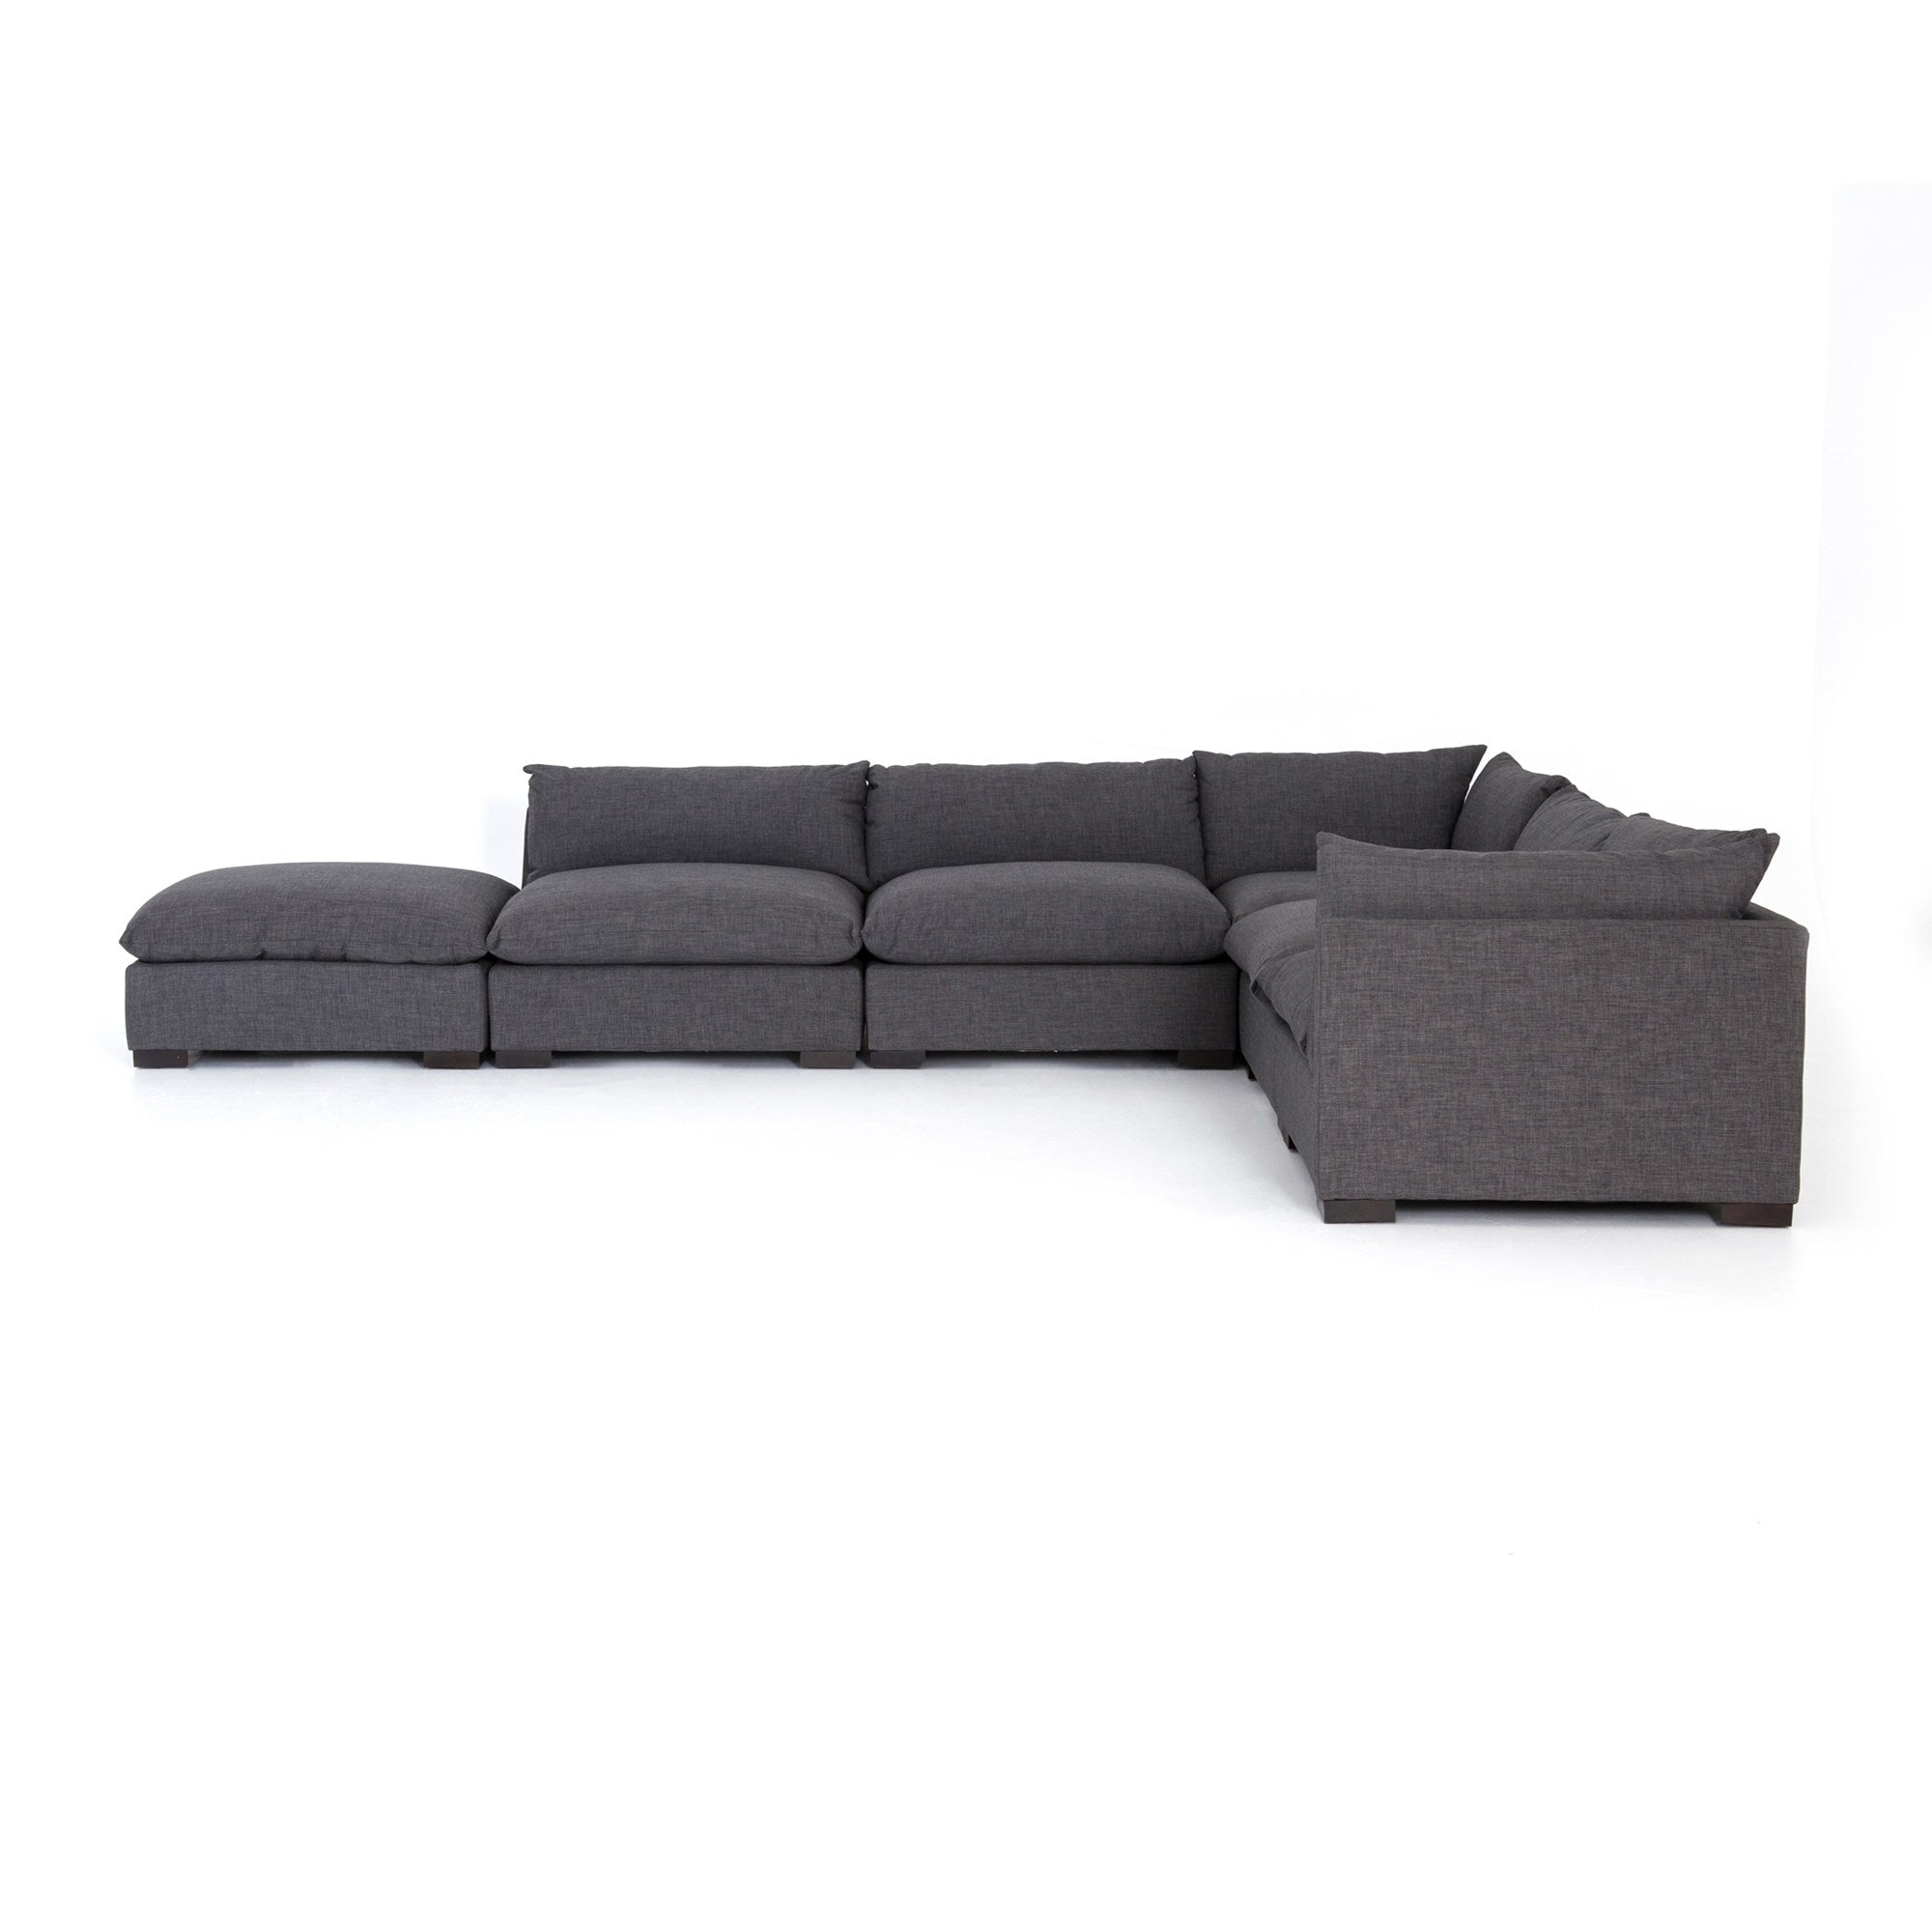 Westwood 5 Piece Sectional with Ottoman